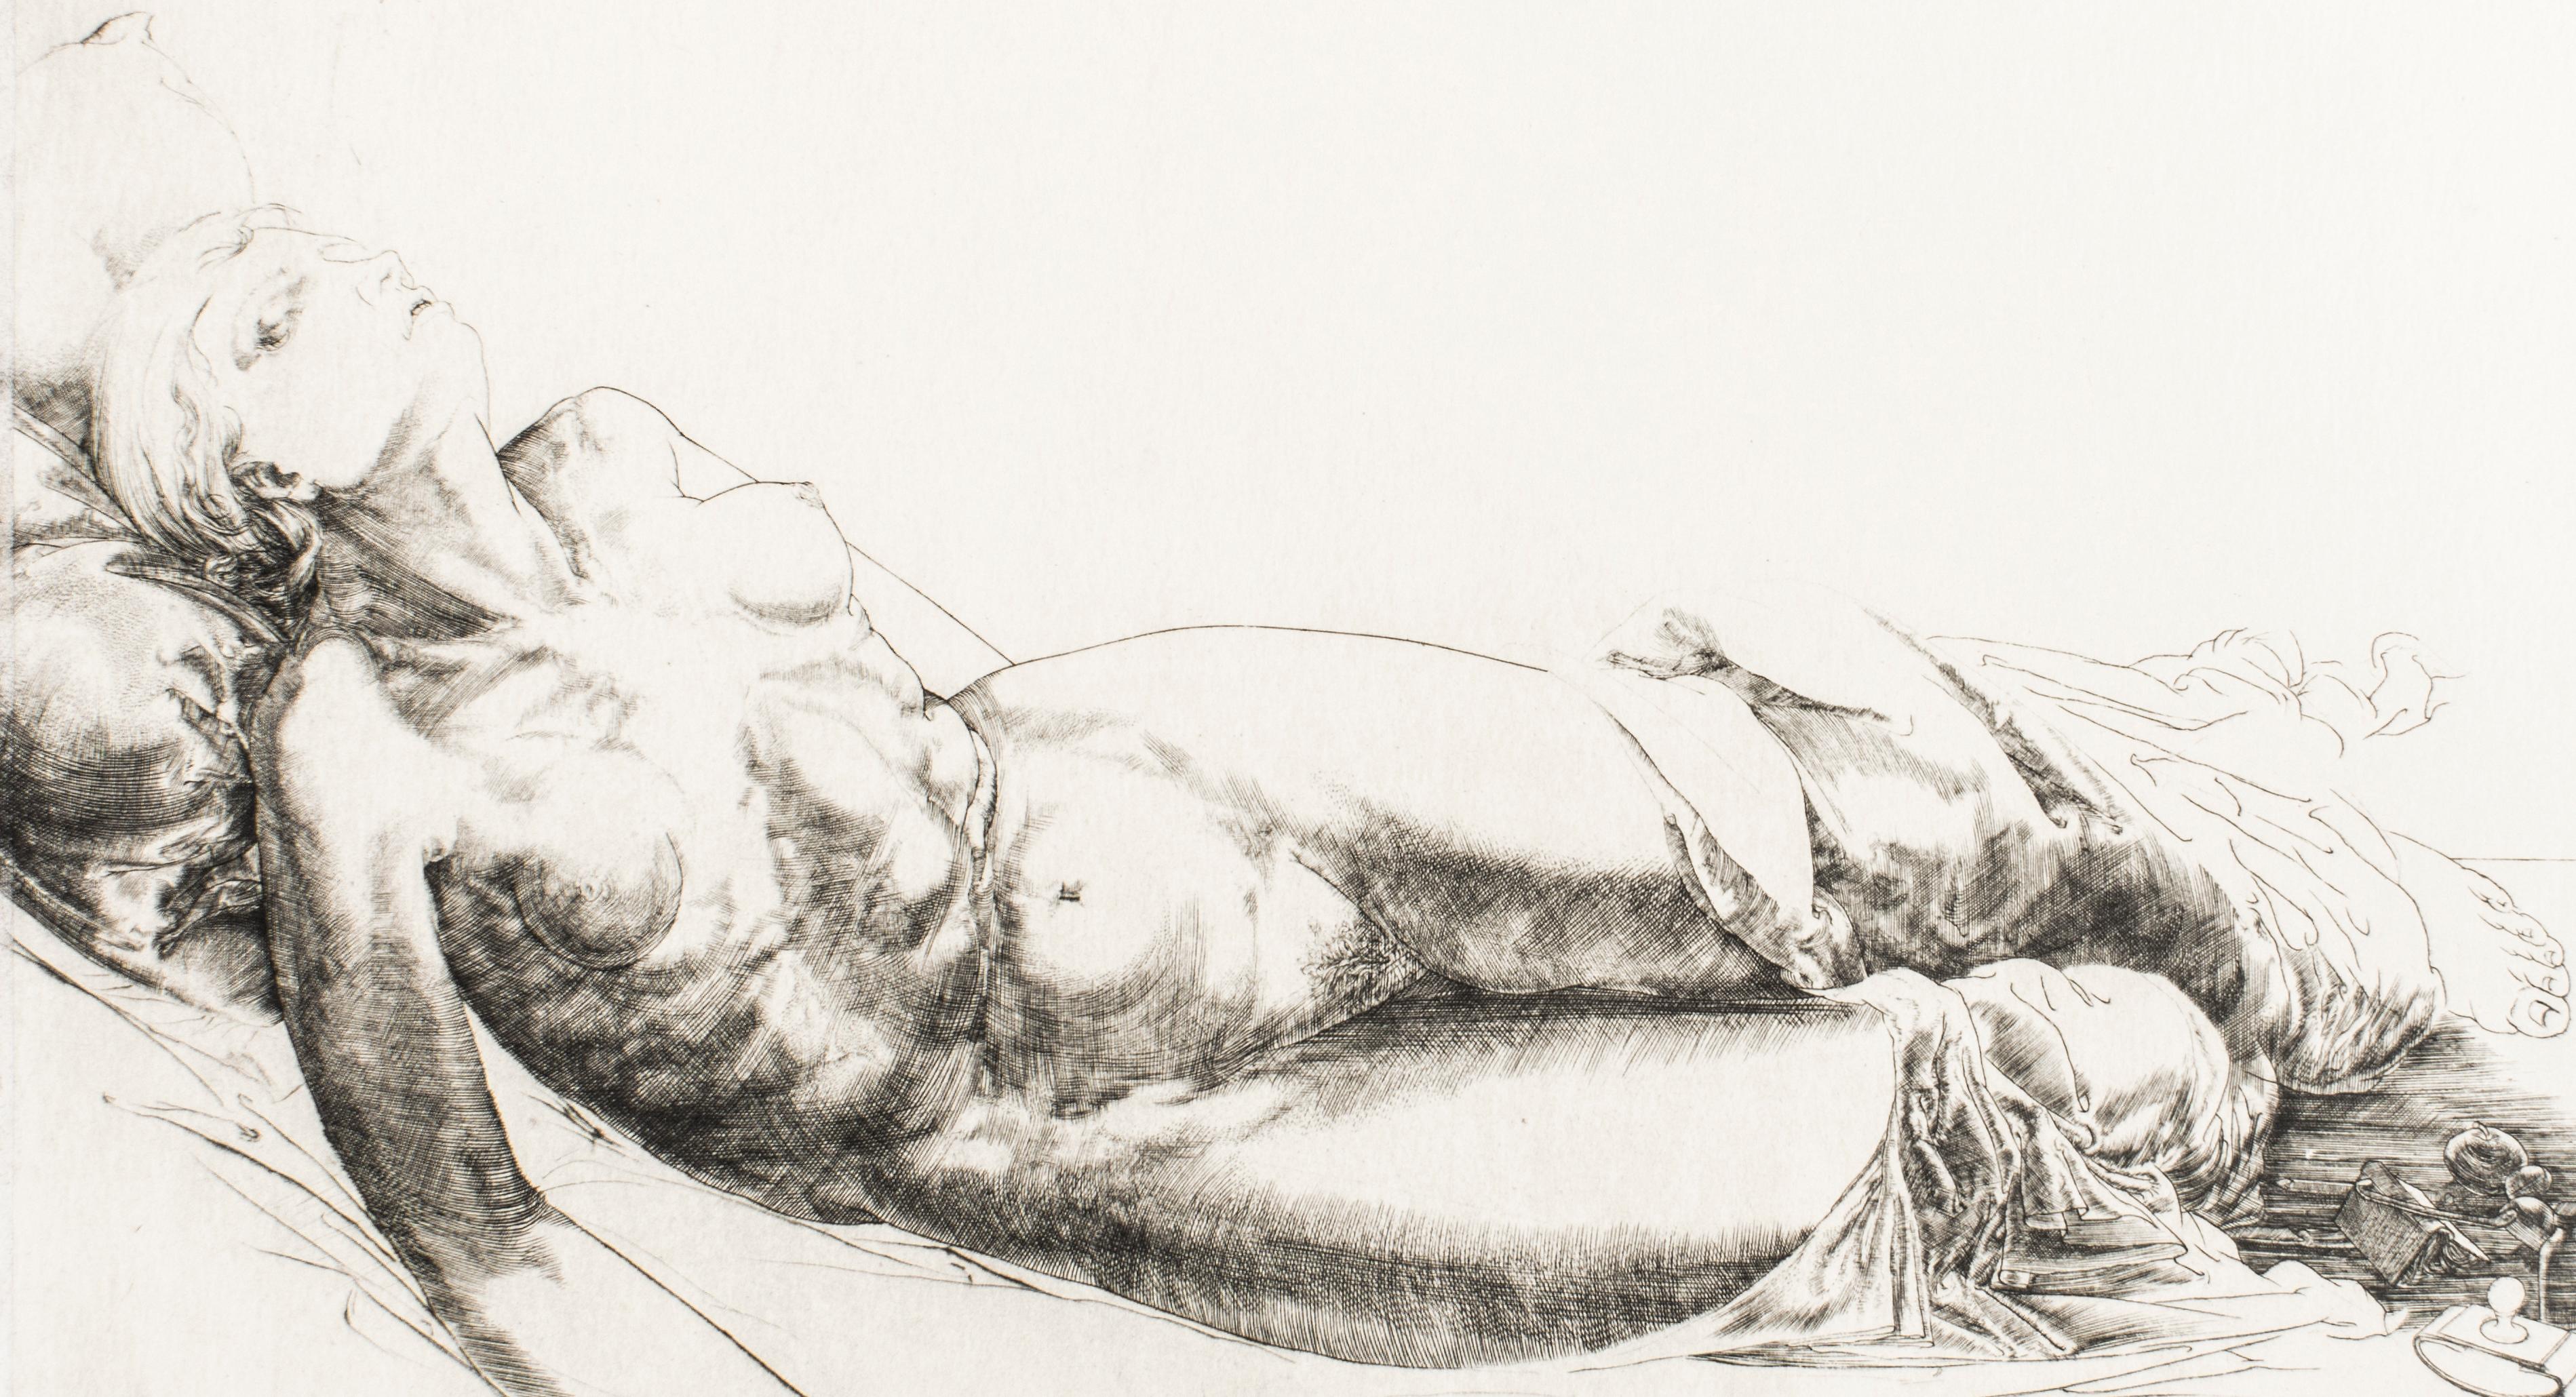 Jean Pierre Velly Print - Femme Allongée / Lying Woman - Original Etching and Drypoint by J.P. Velly 